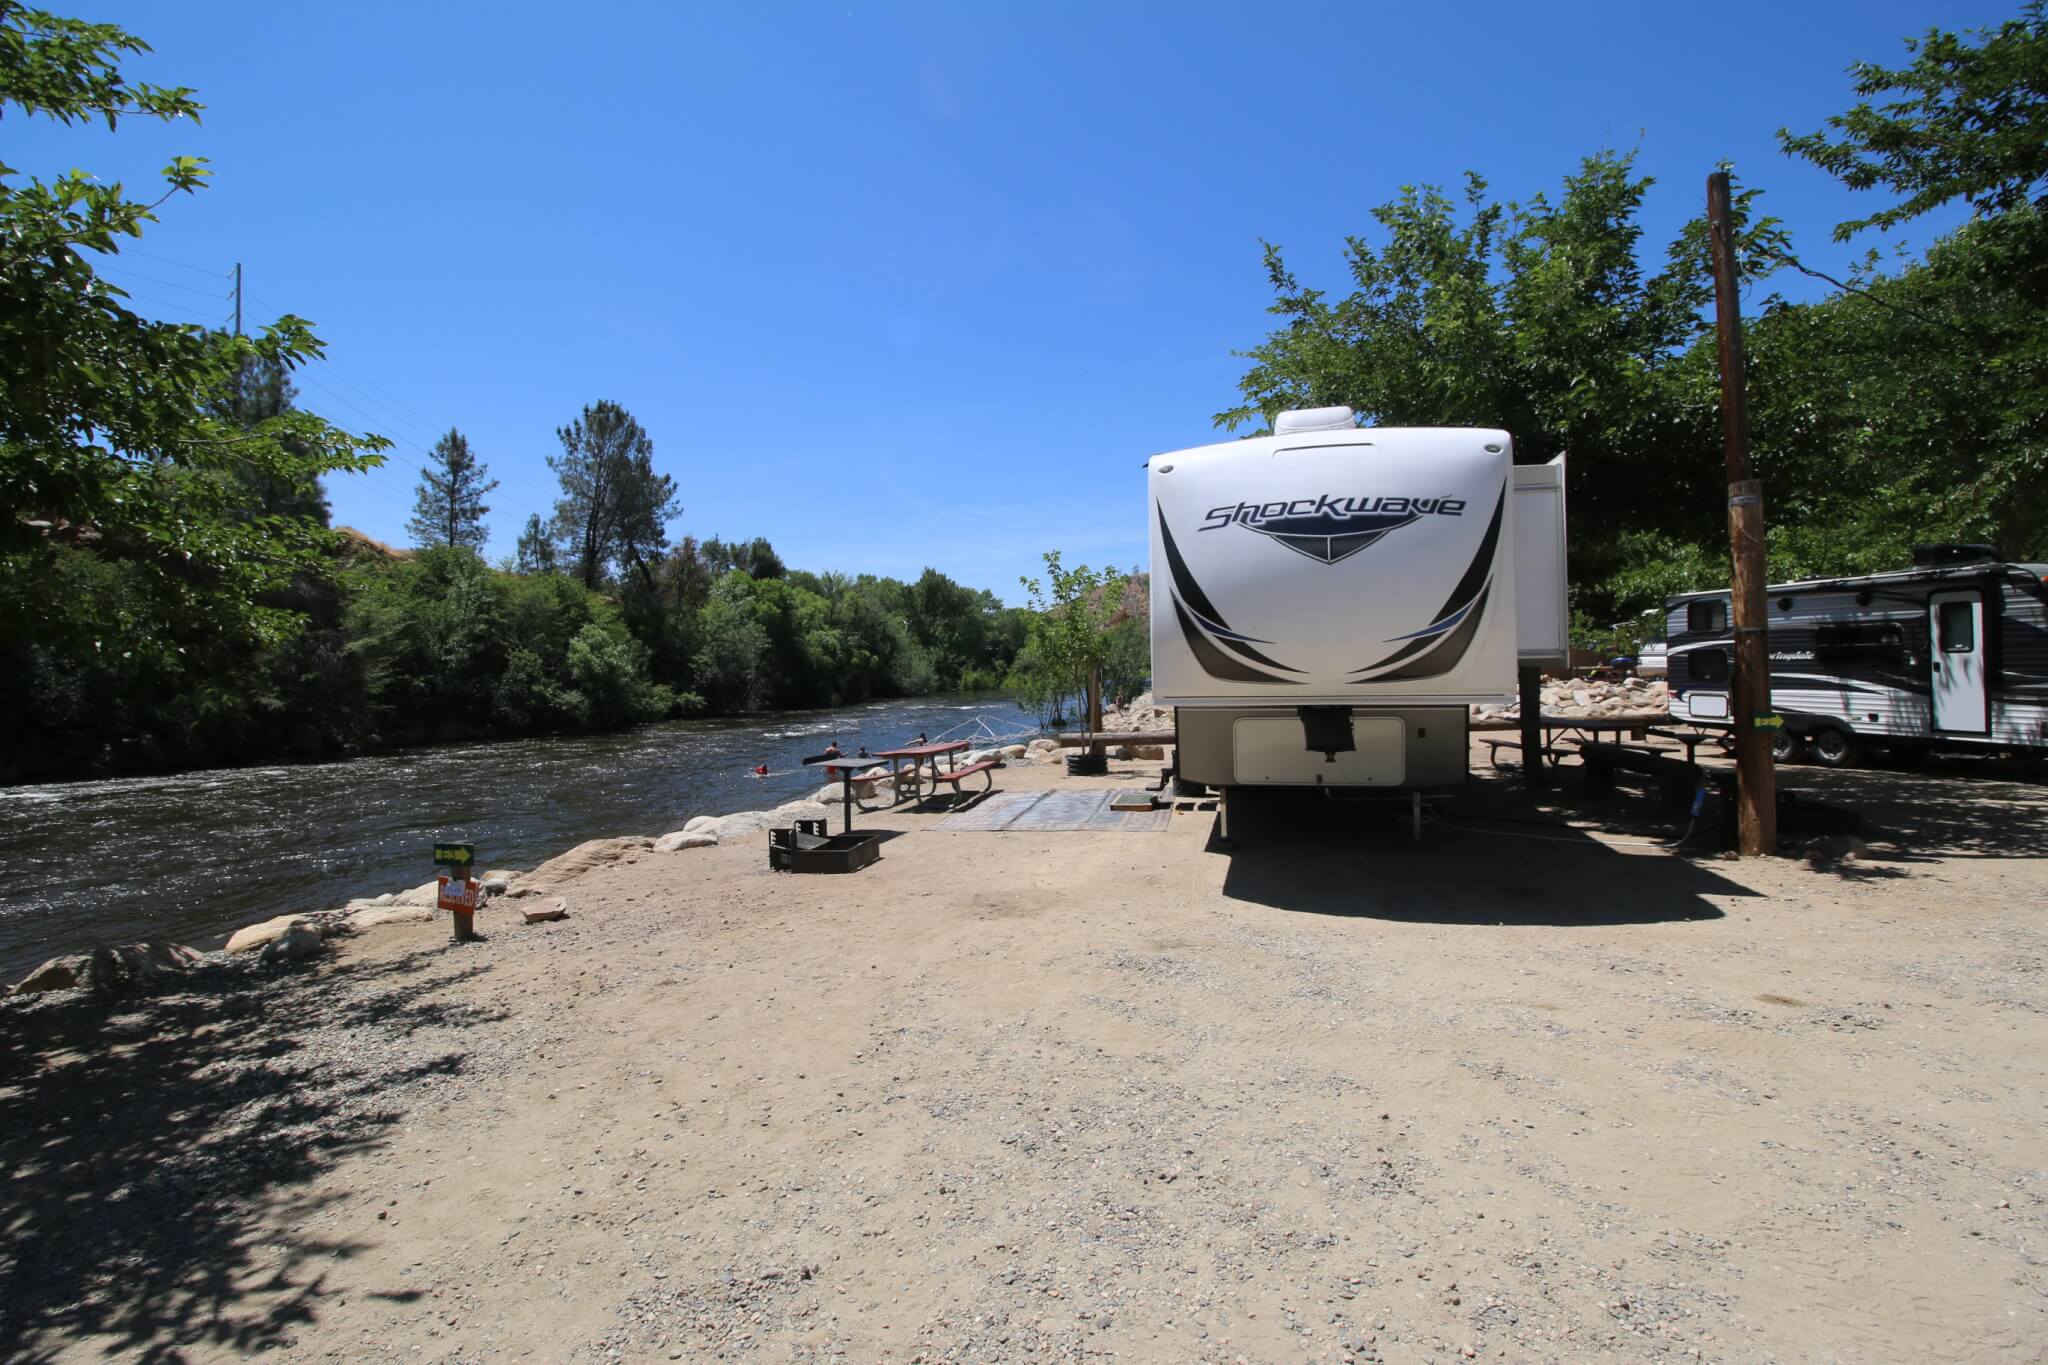 Kern River Campgrounds - Camp Kernville Site E3